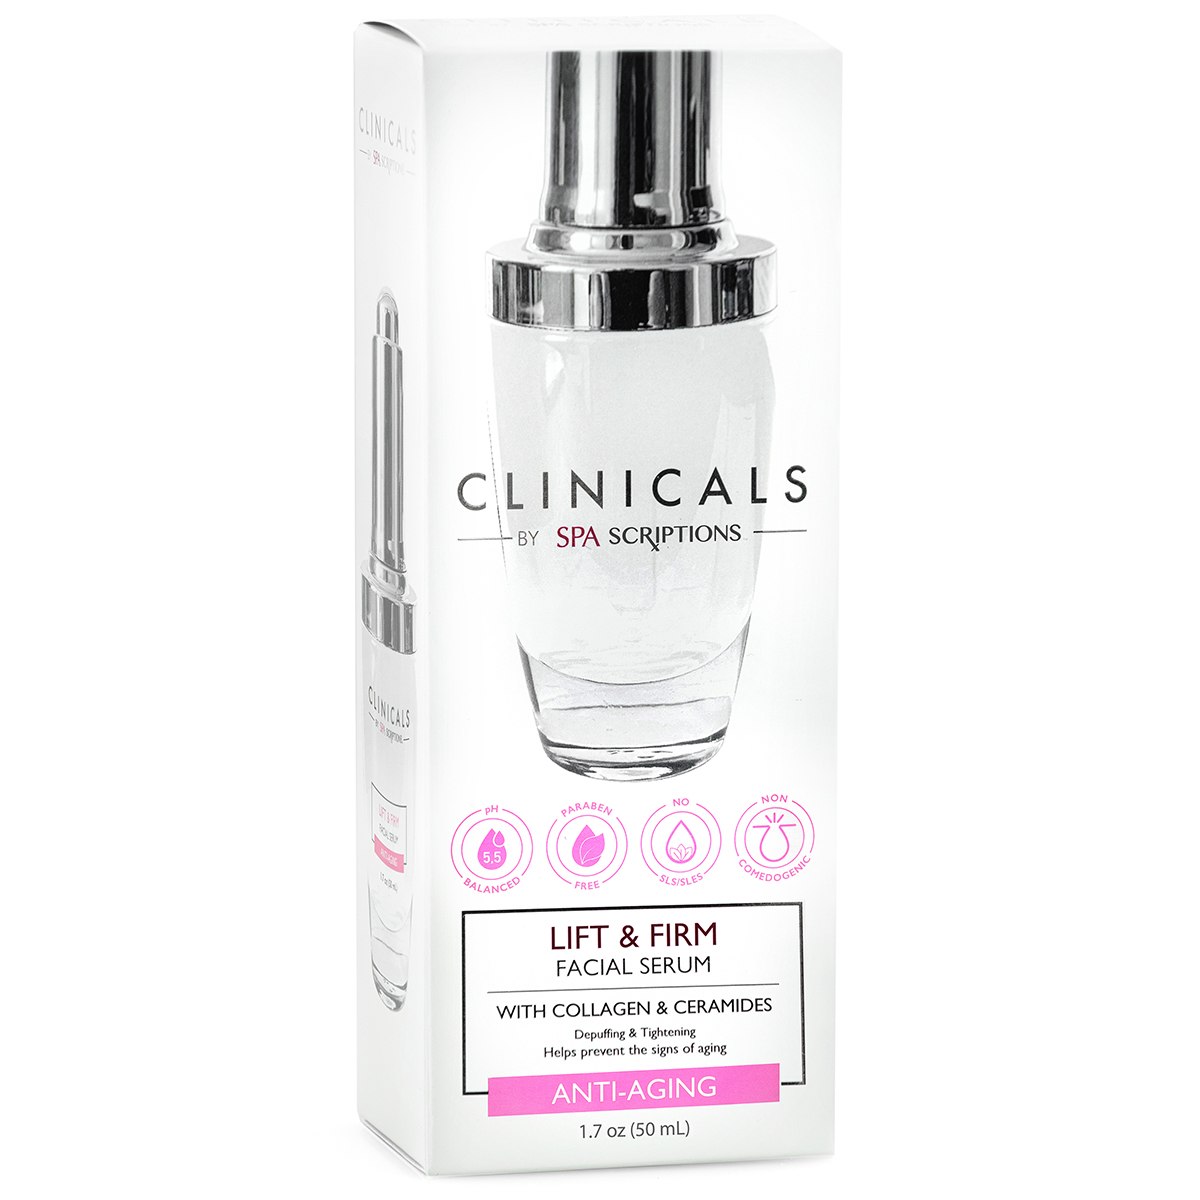 Clinicals By Spascriptions Lift & Firm Facial Serum